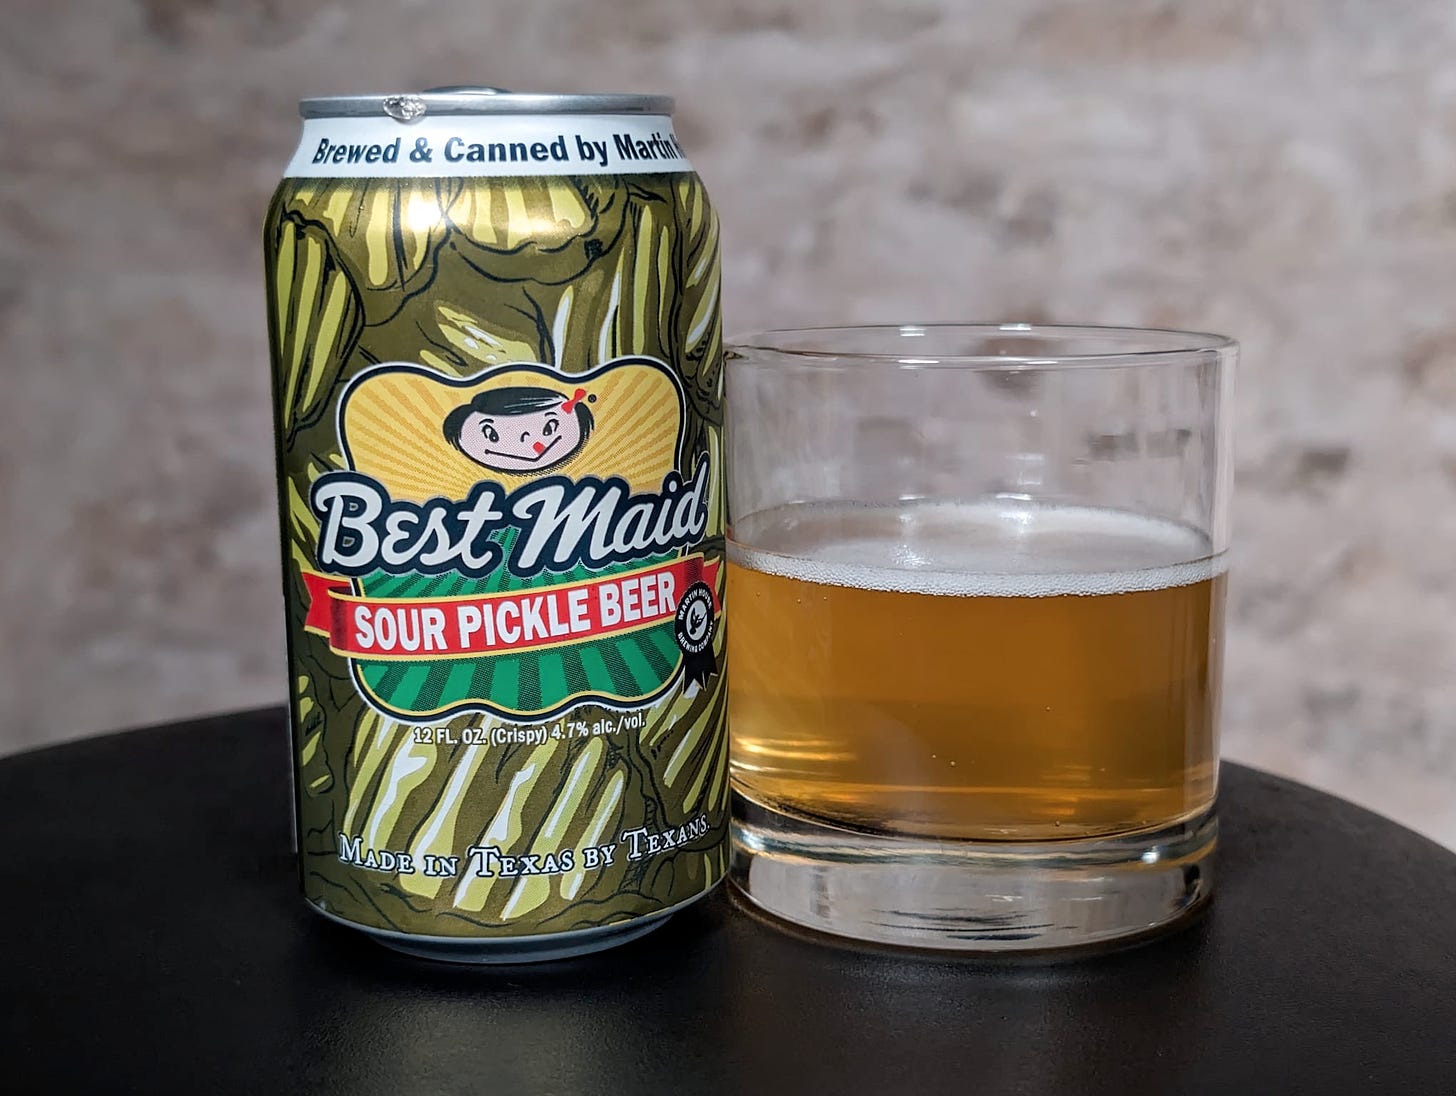 A can of "Best Maid Sour Pickle Beer" right next to a round glass halfway filled with it